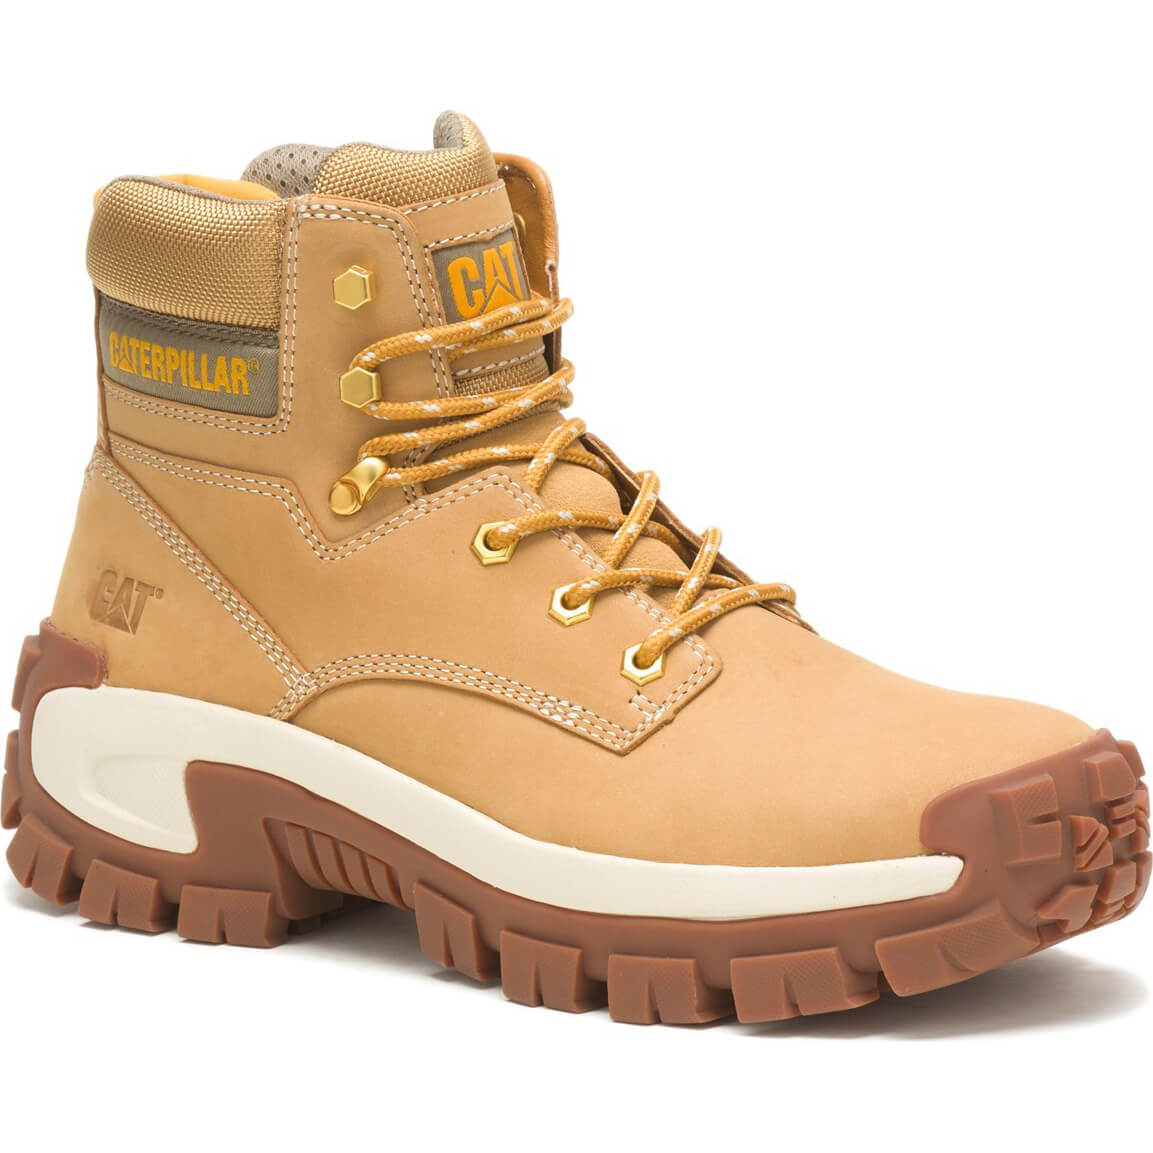 Image of Caterpillar Mens Invader Hiker Safety Boot Honey Size 10